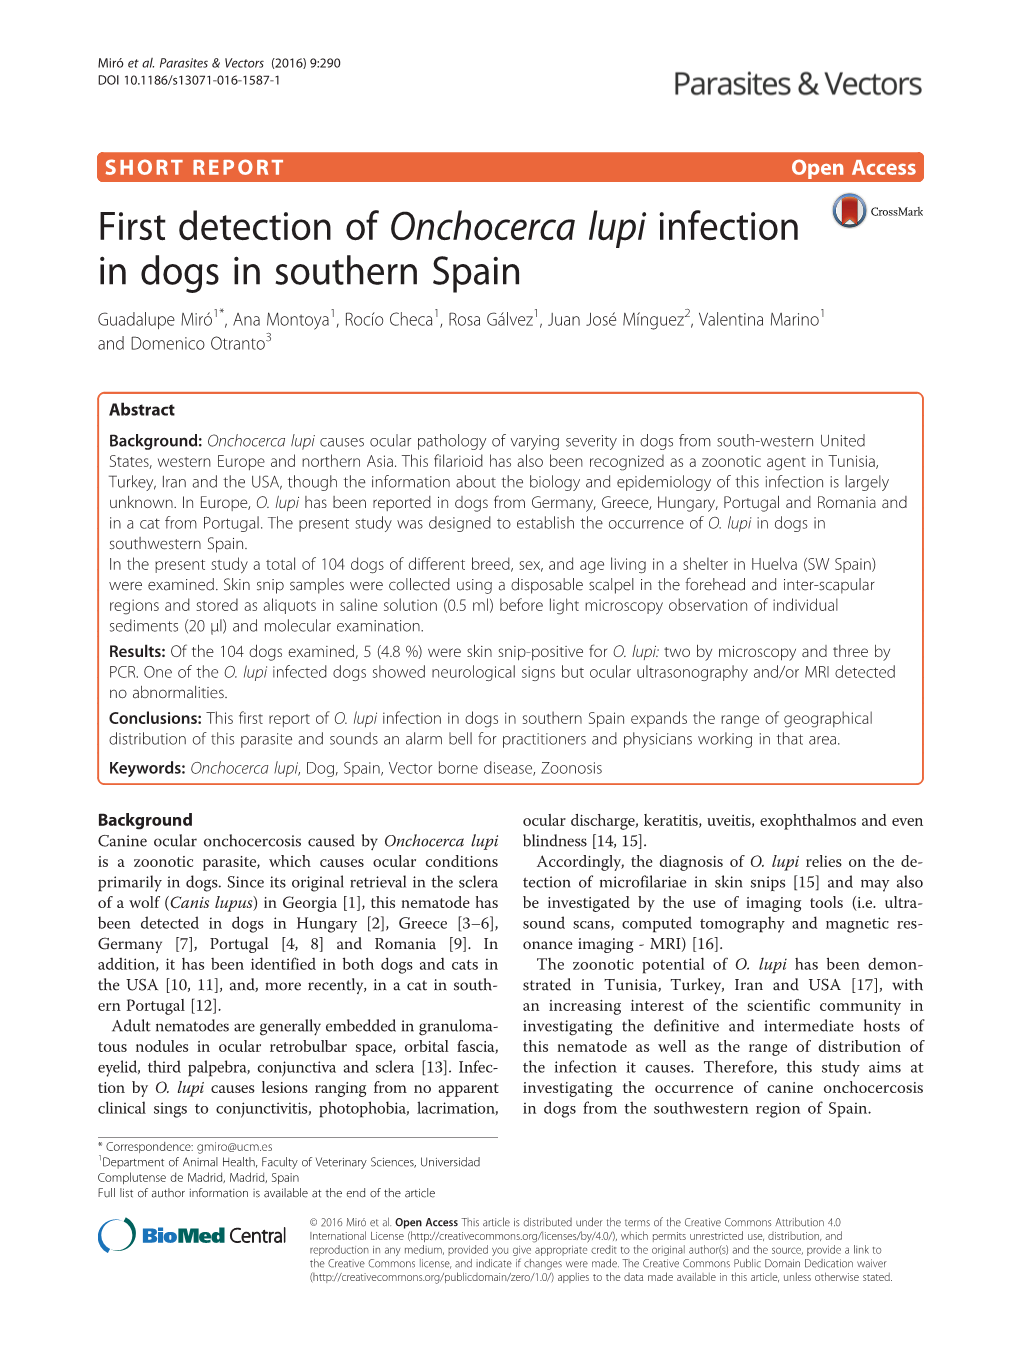 First Detection of Onchocerca Lupi Infection in Dogs in Southern Spain